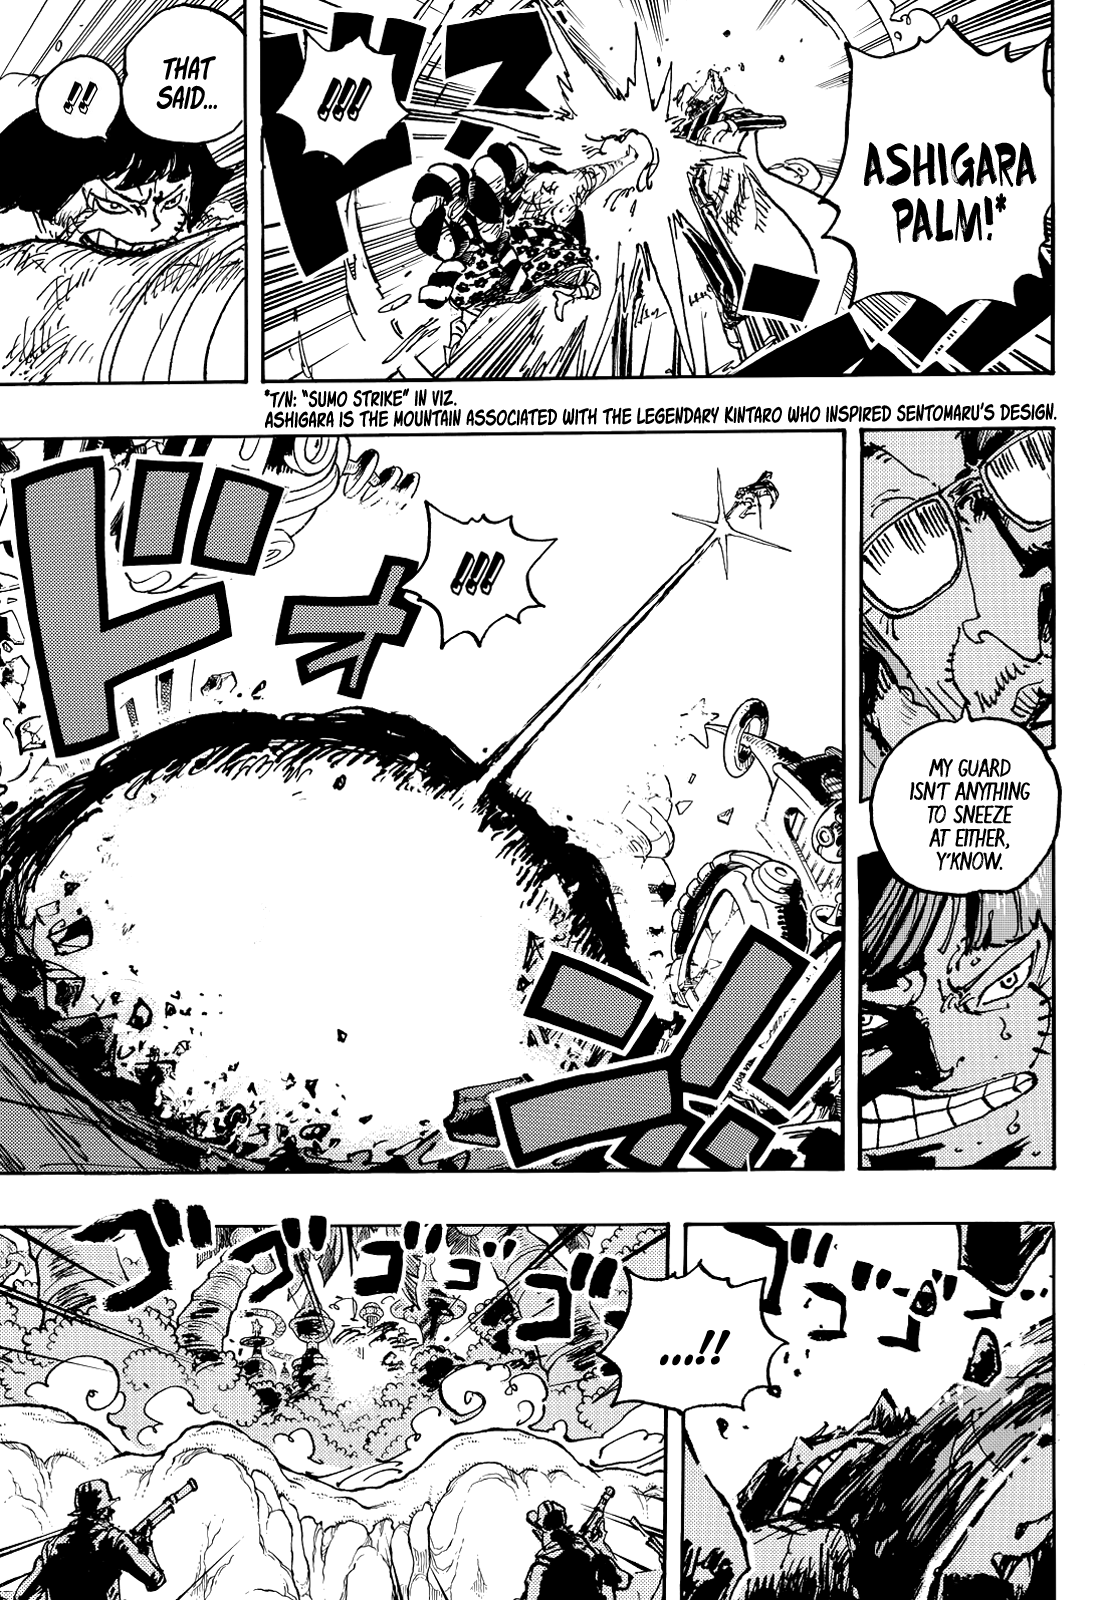 One Piece, Chapter 1095  TcbScans Org - Free Manga Online in High Quality